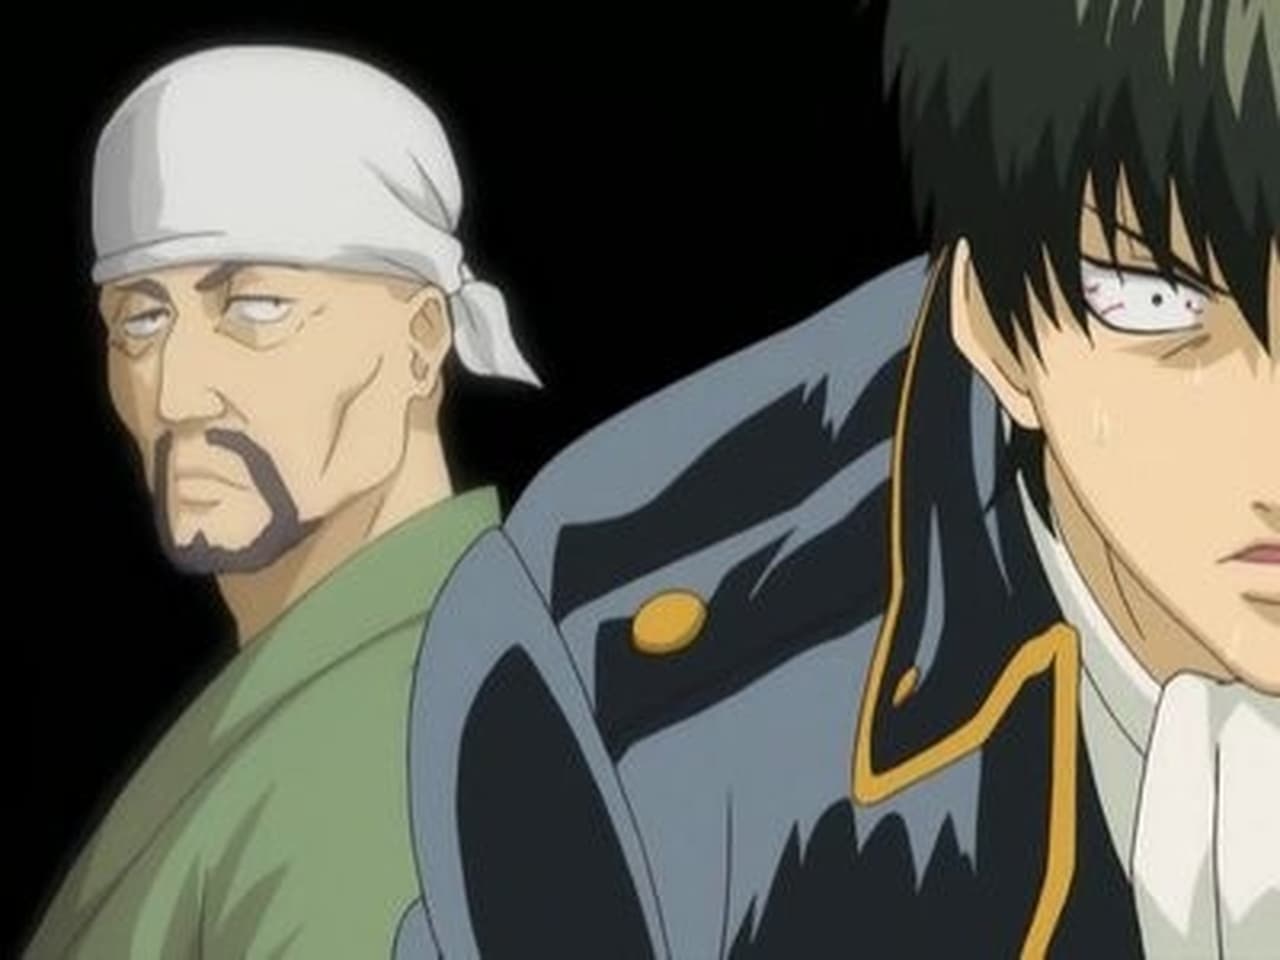 Gintama - Season 3 Episode 2 : Rules Are Made to be Broken